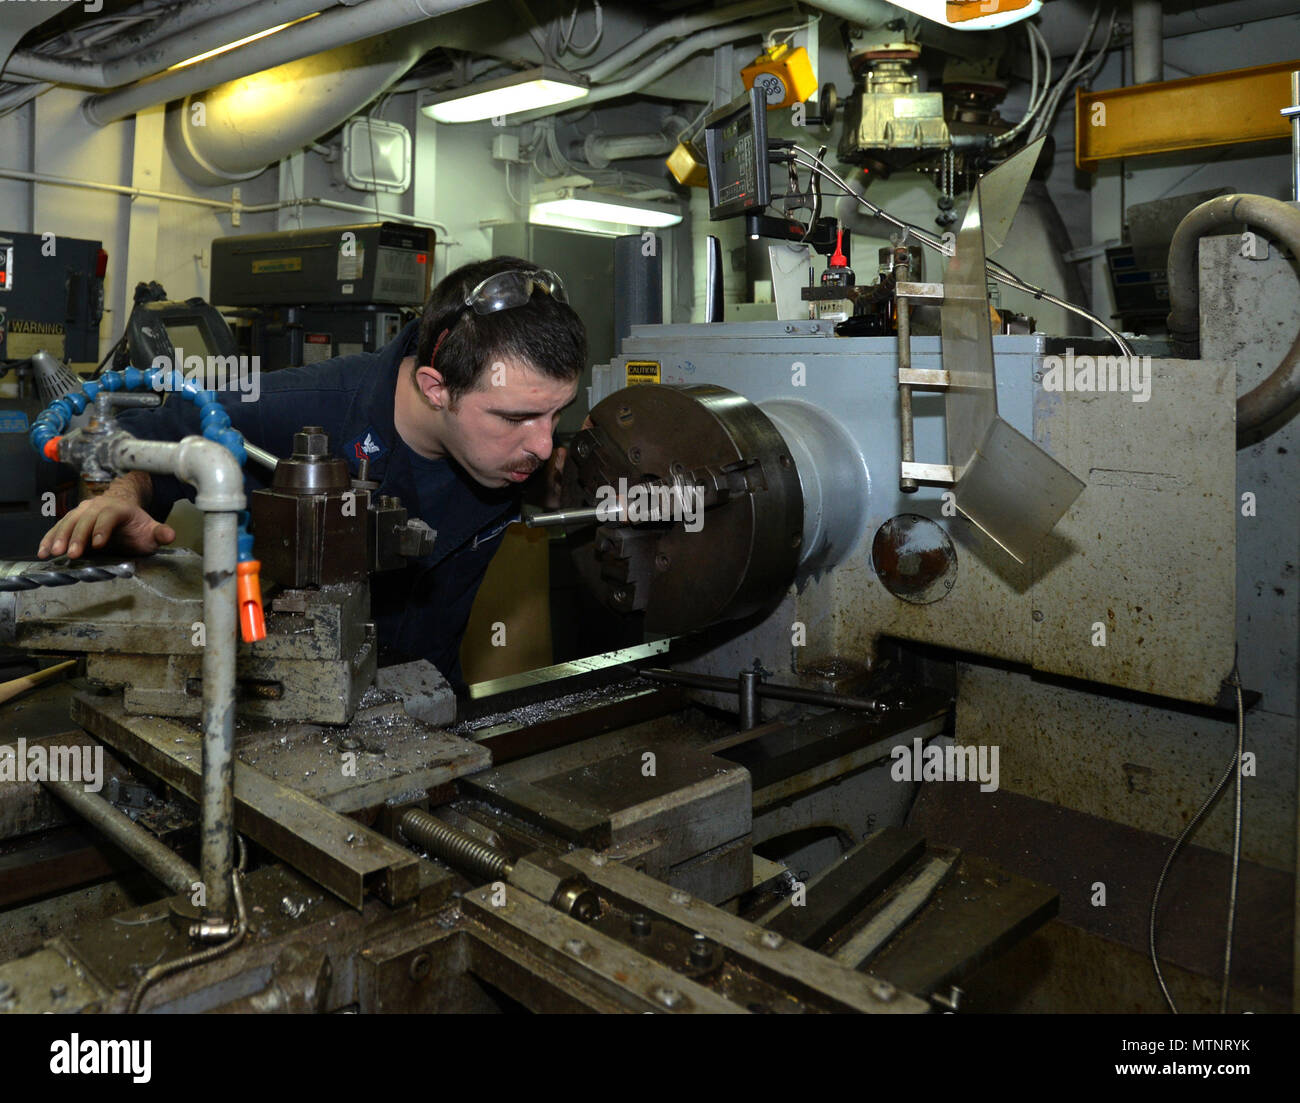 170113-N-HP188-026  ATLANTIC OCEAN (Jan. 13, 2017) – Machinery Repairman 2nd Class Tim Grover, a native of Hillsboro, Oregon, blows shavings off of a newly cut shaft in the Machine Shop aboard the Wasp-class multipurpose amphibious assault ship USS Bataan (LHD 5). Bataan is underway conducting Composite Training Unit Exercise (COMPTUEX) with the Bataan Amphibious Ready Group in preparation for an upcoming deployment.  (U.S. Navy photo by Mass Communication Specialist 3rd Class Mutis A. Capizzi/Released) Stock Photo